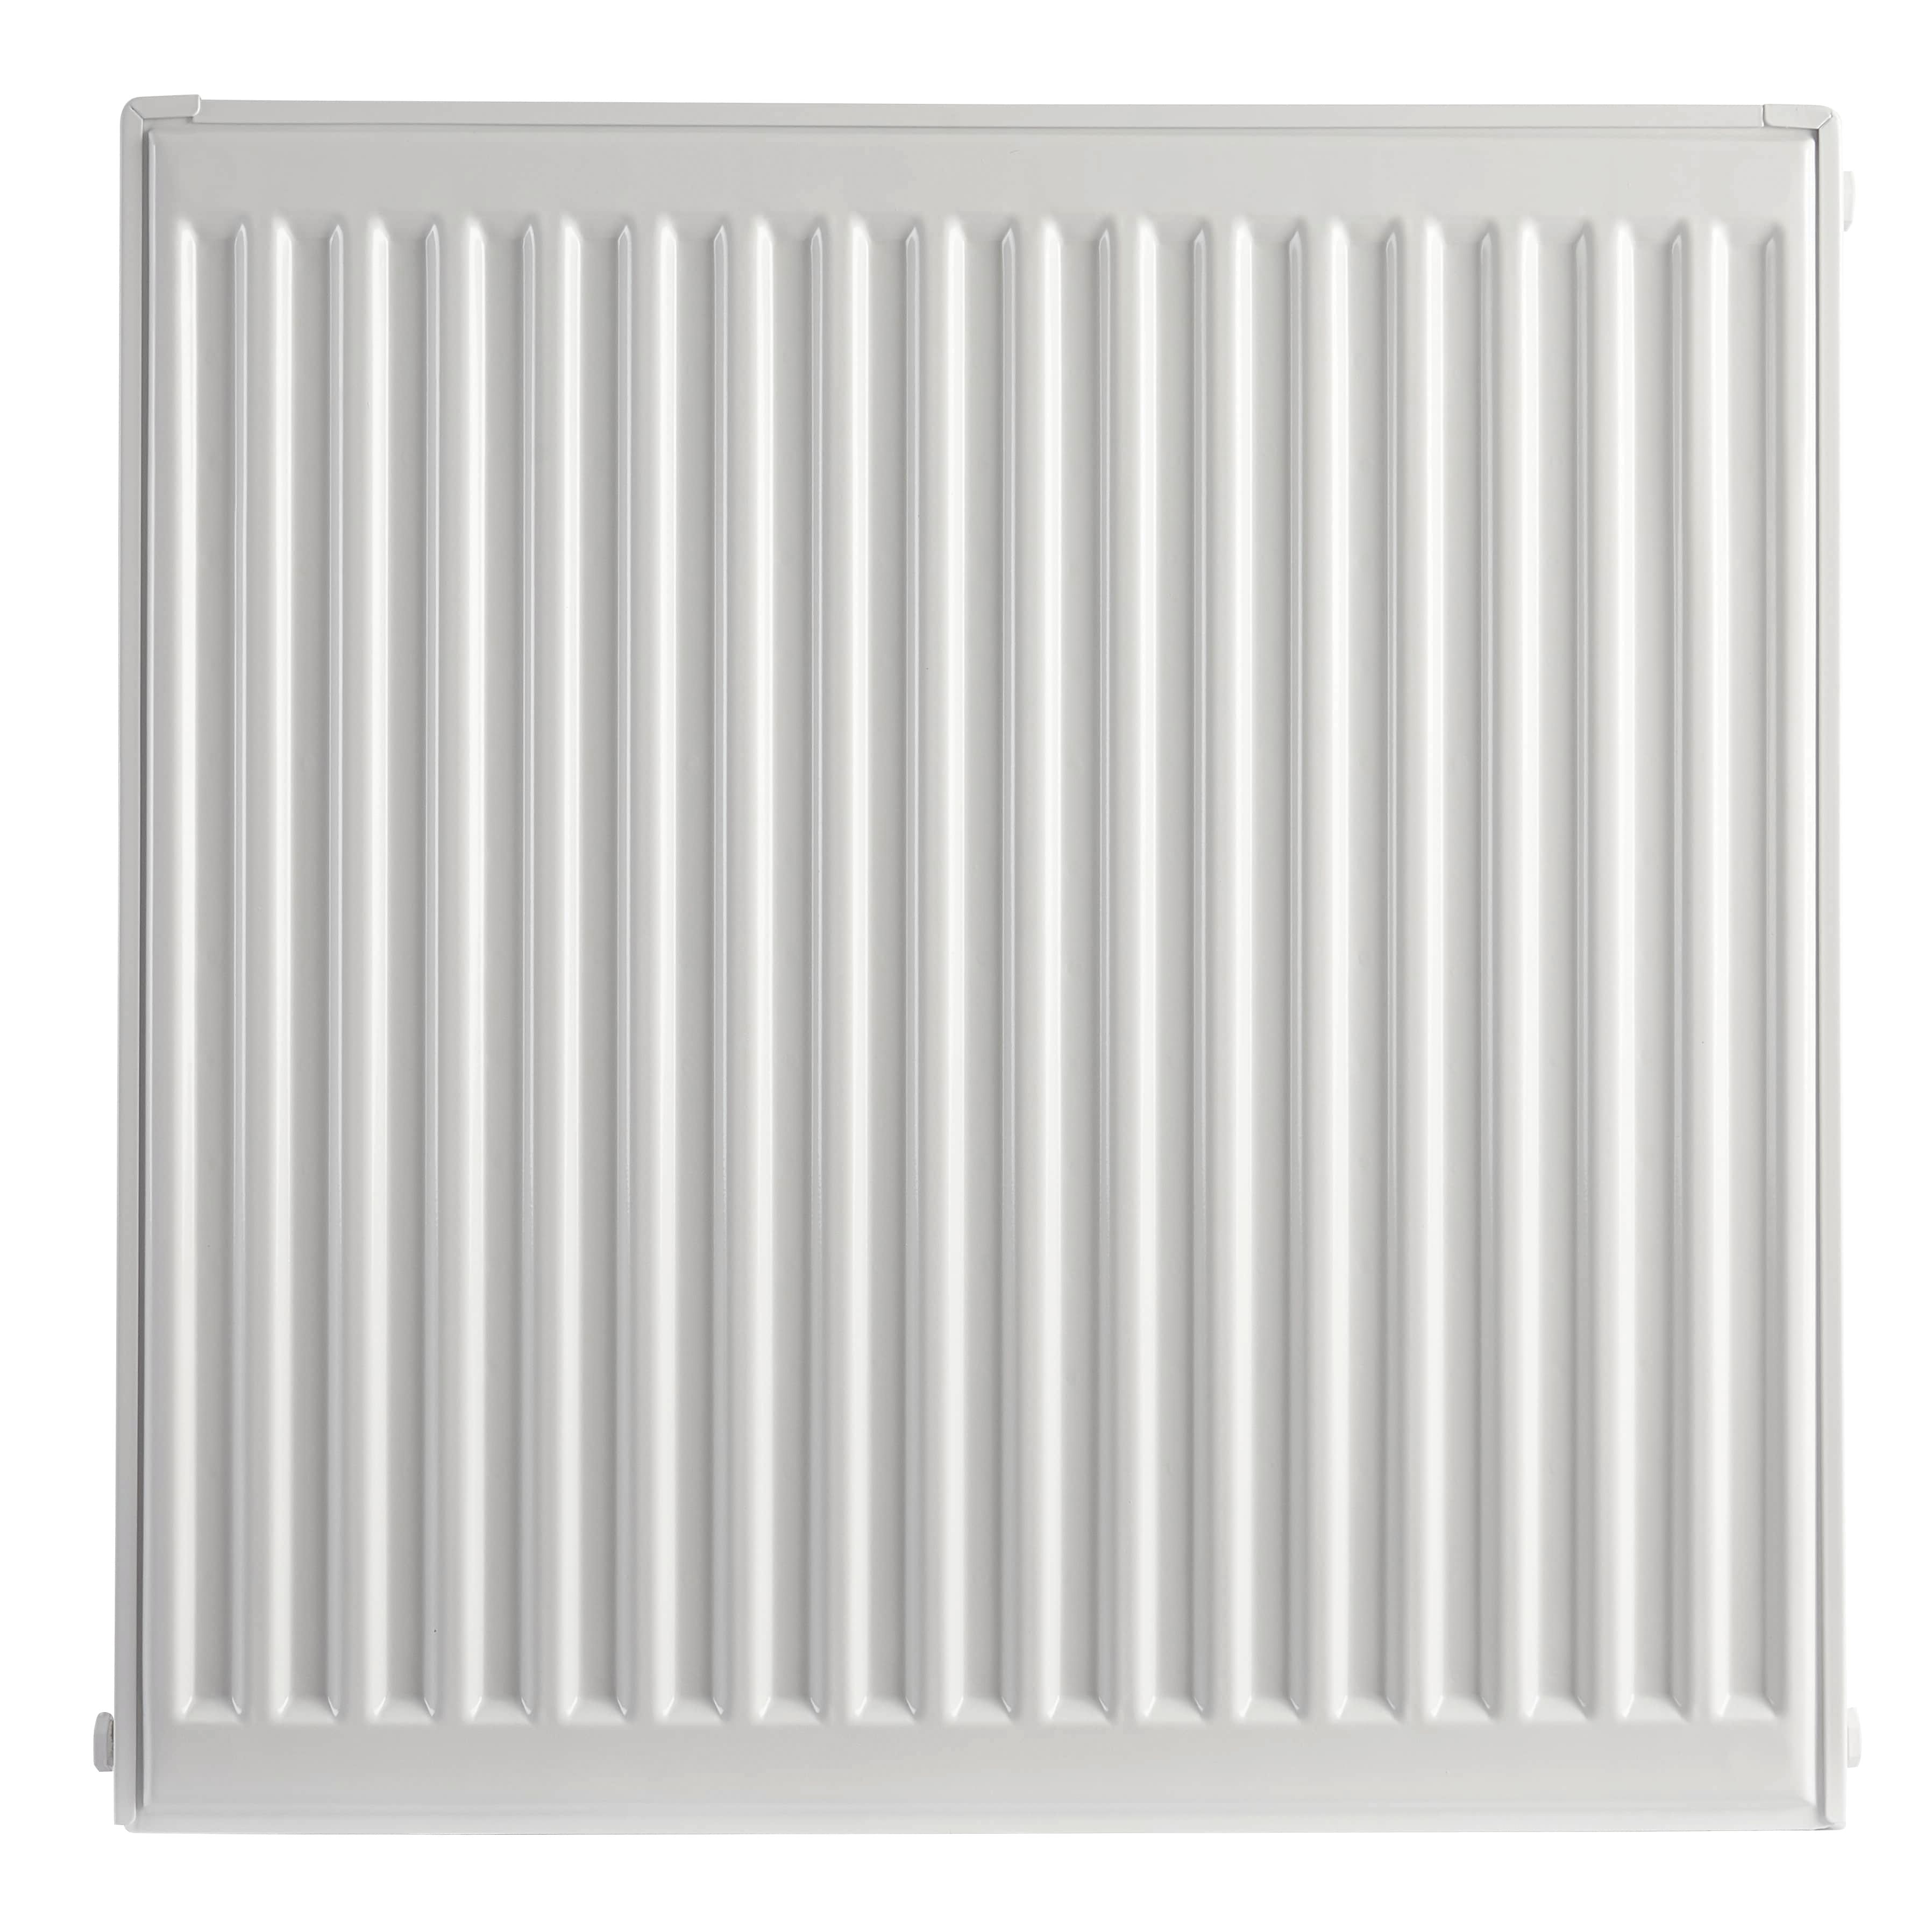 Image of Homeline by Stelrad 700 x 500mm Type 11 Single Panel Single Convector Radiator